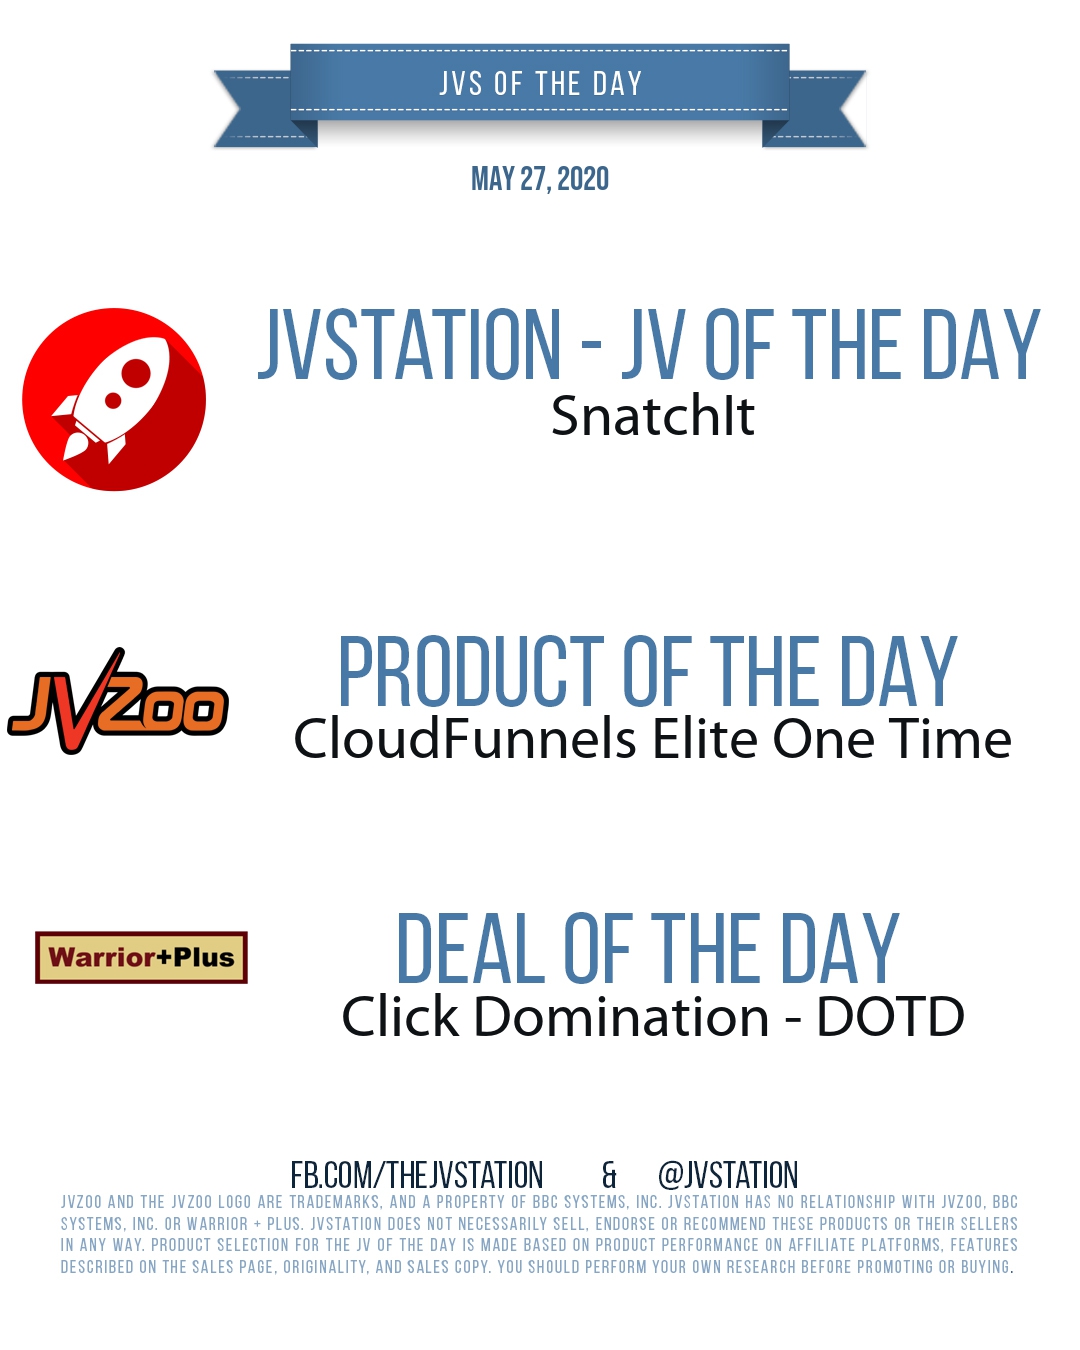 JVs of the day - May 27, 2020